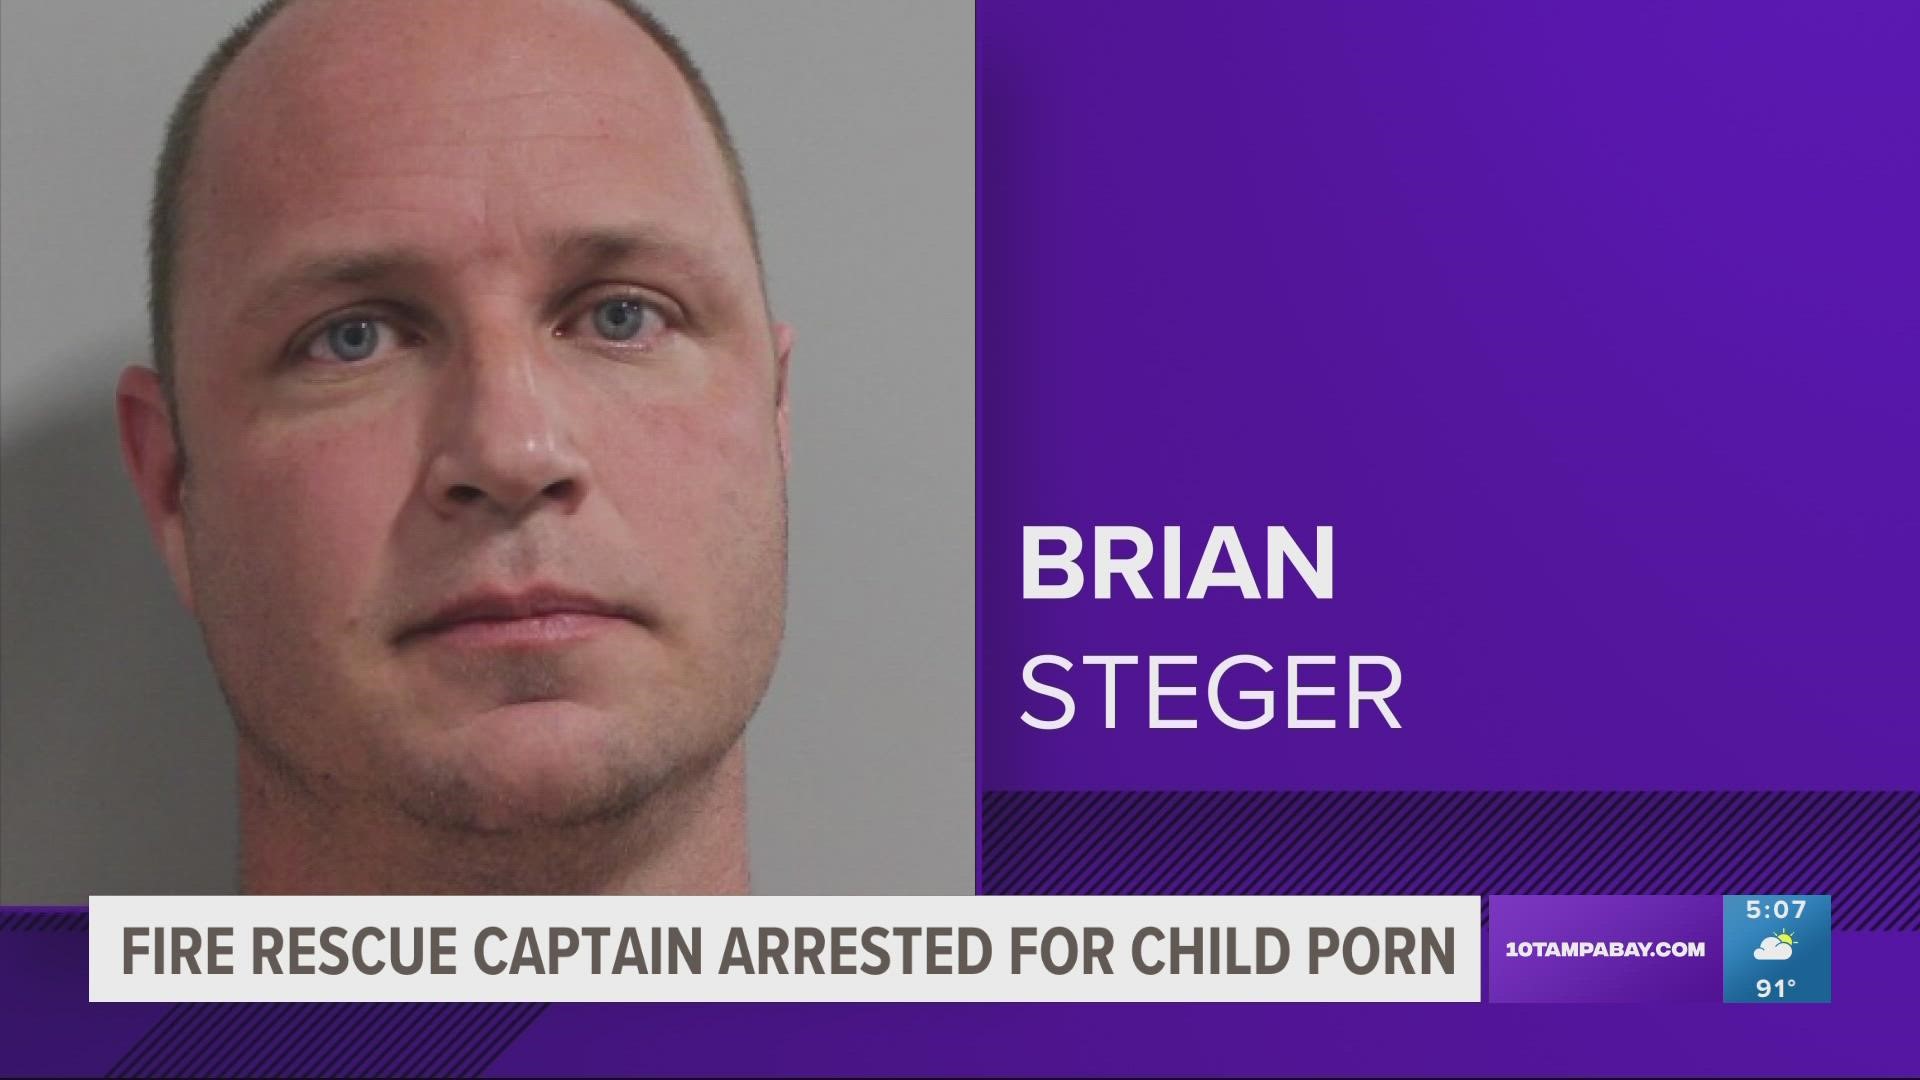 Brian Steger resigned from his position in lieu of termination following his arrest, the sheriff's office said.